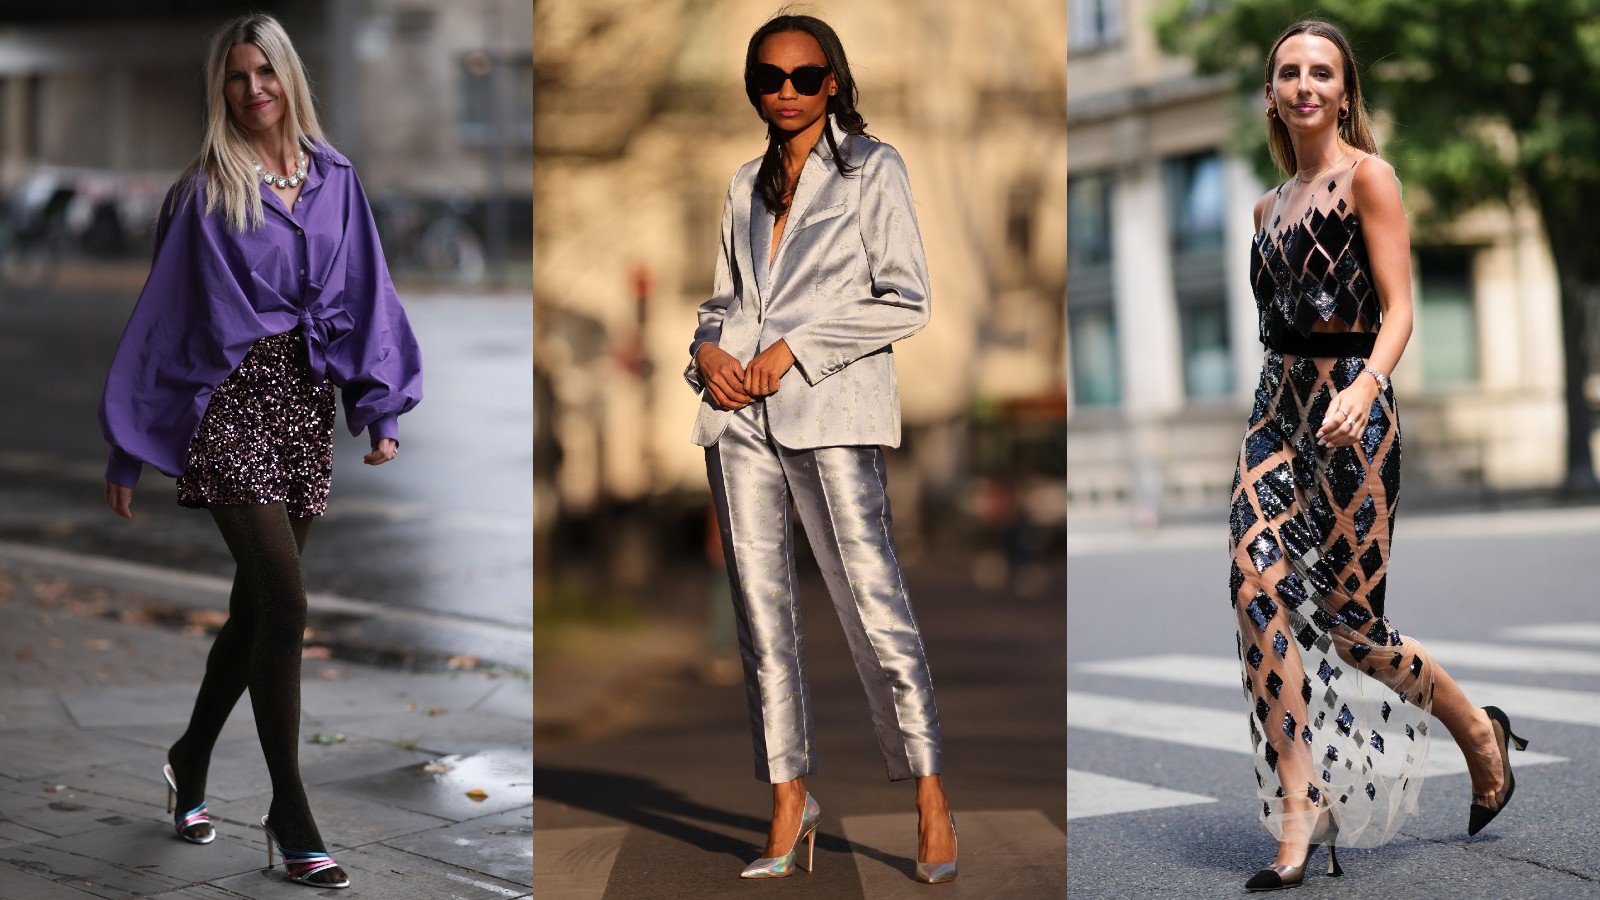 15 Stunning Outfits To Wear On New Year's Eve